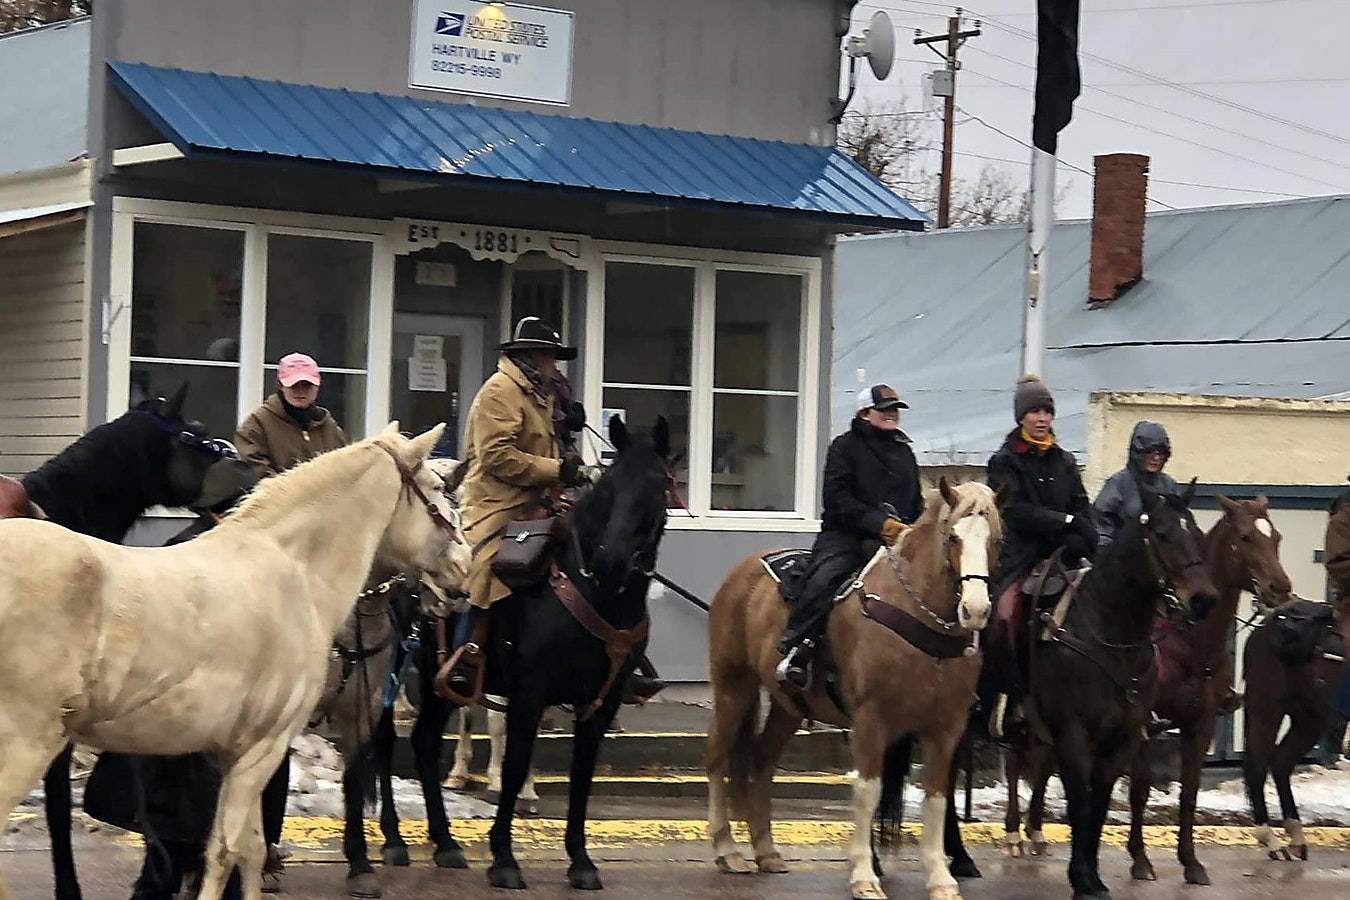 The Pony Express has become part of the Hartville Valentine's Day tradition, bringing valentines to the tiny Wyoming post office for its annual commemorative stamp.